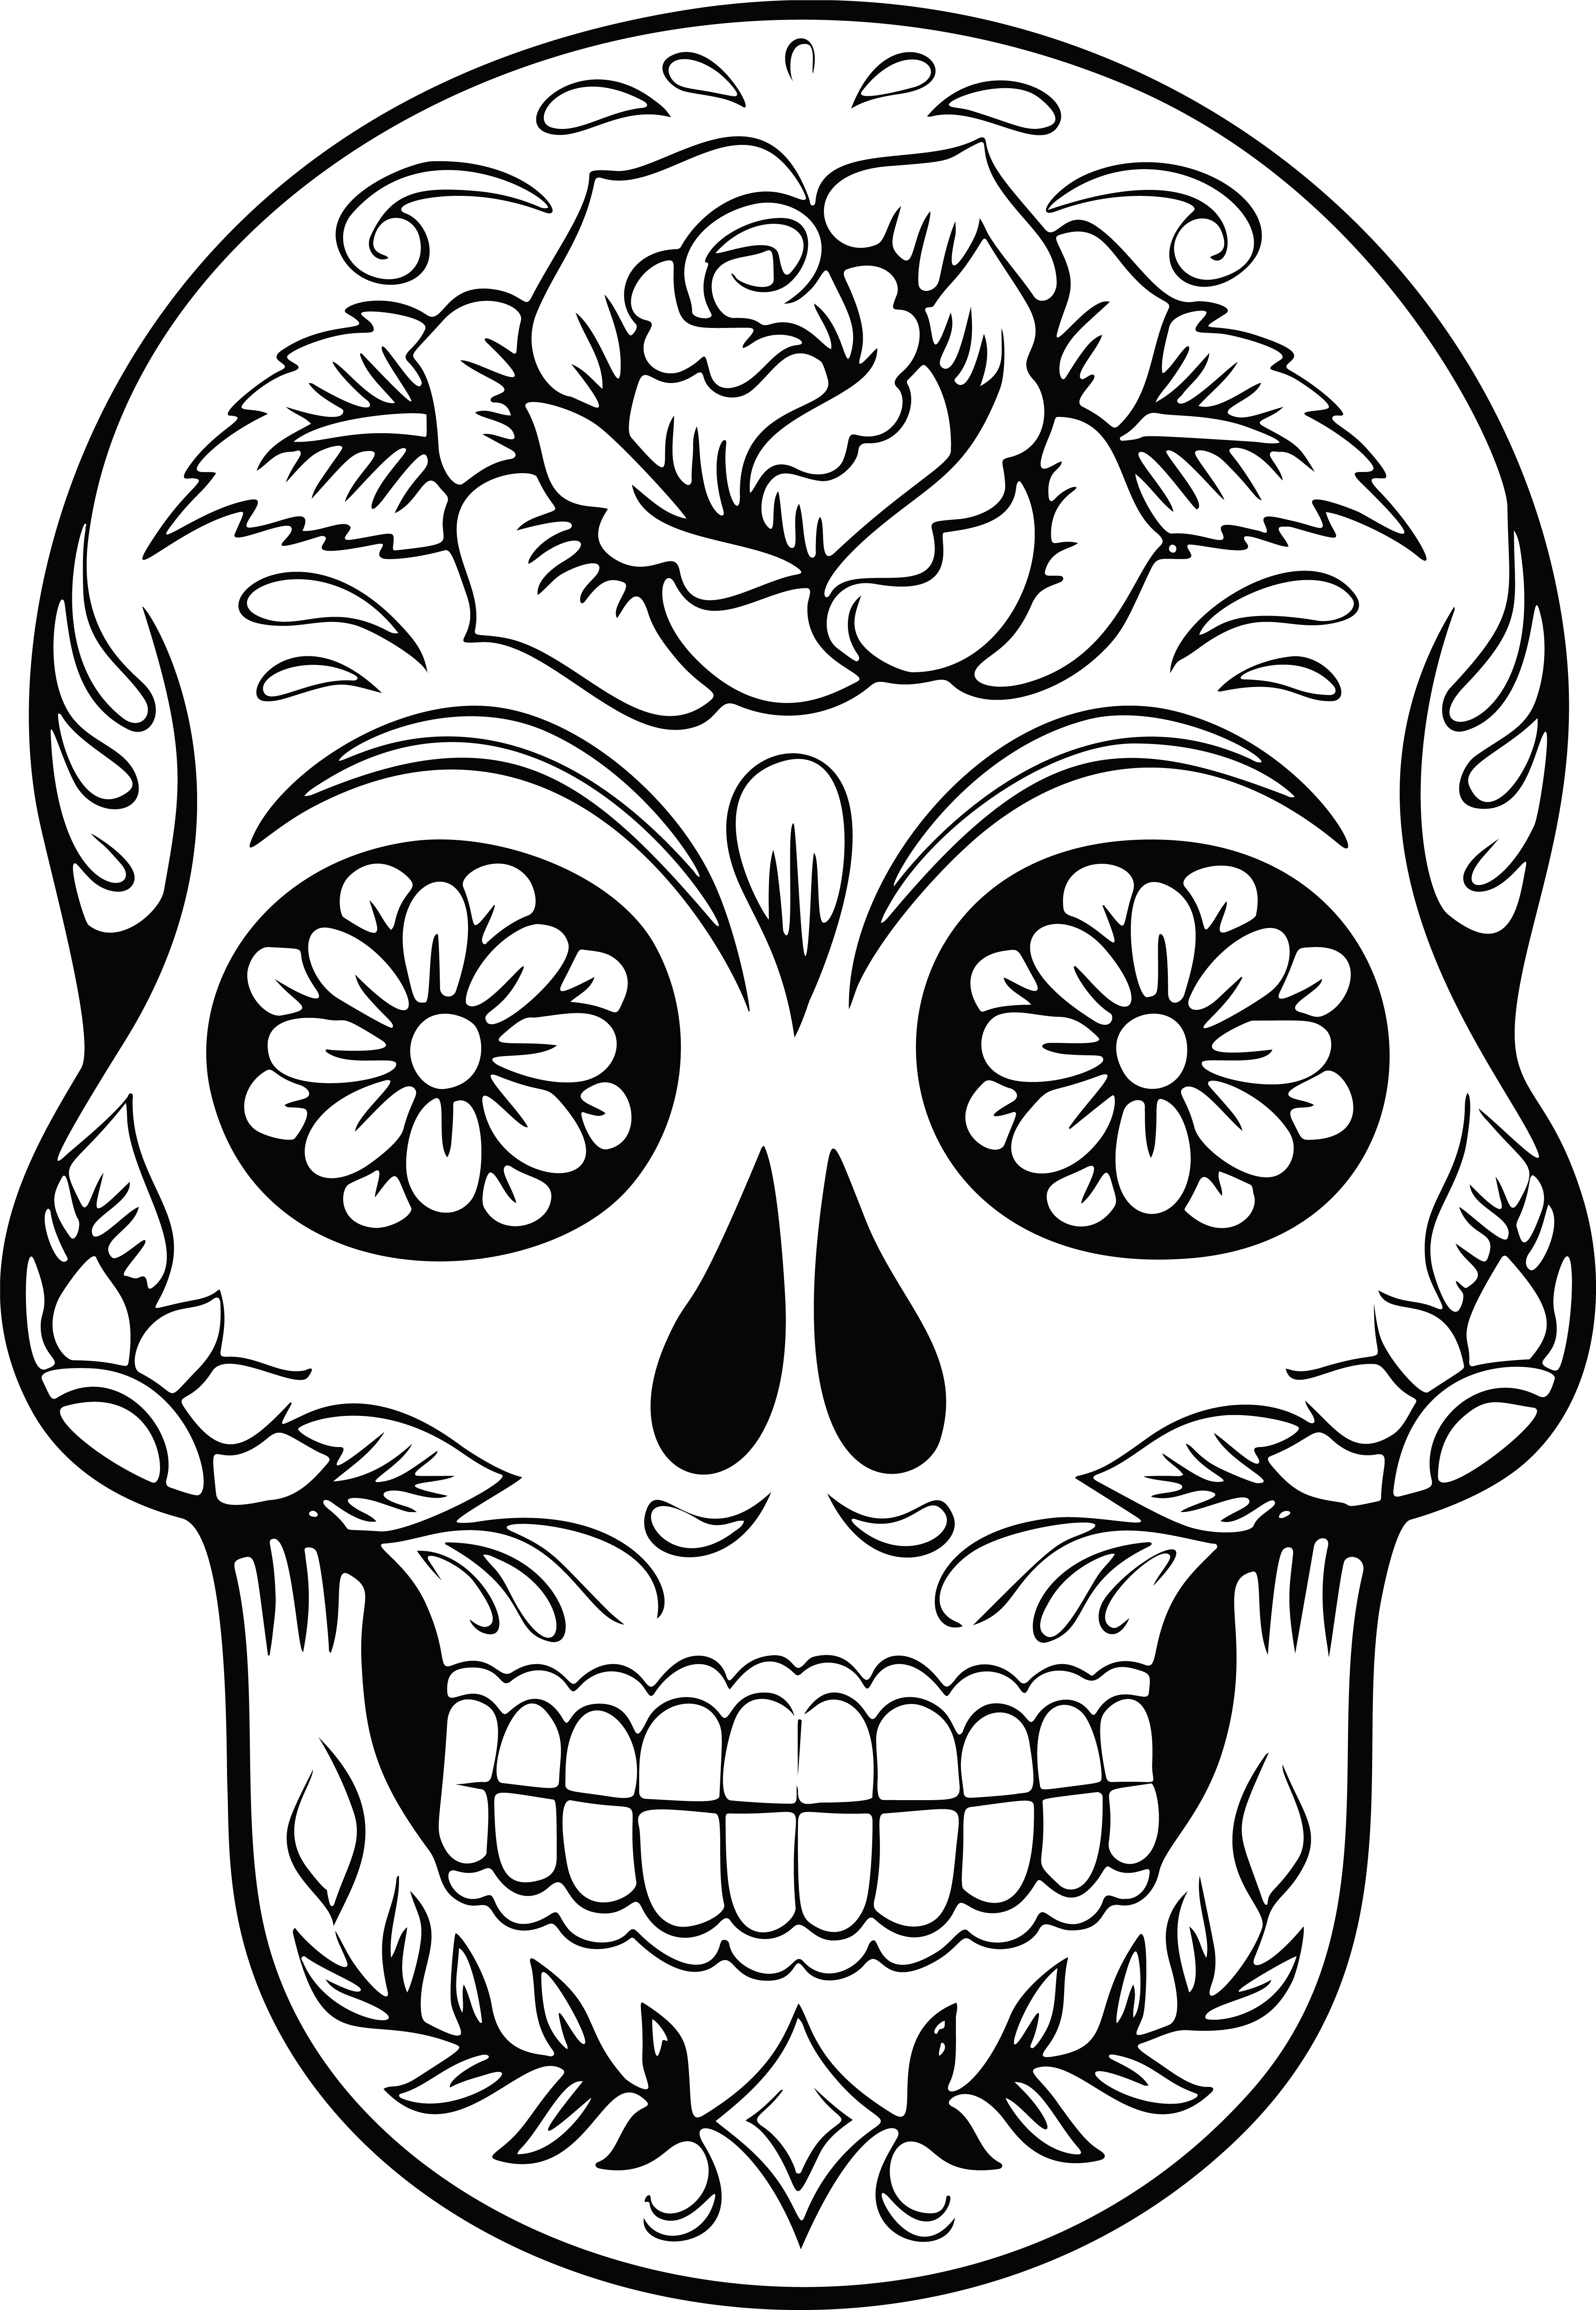 Download Free Clipart Of A Sugar Skull